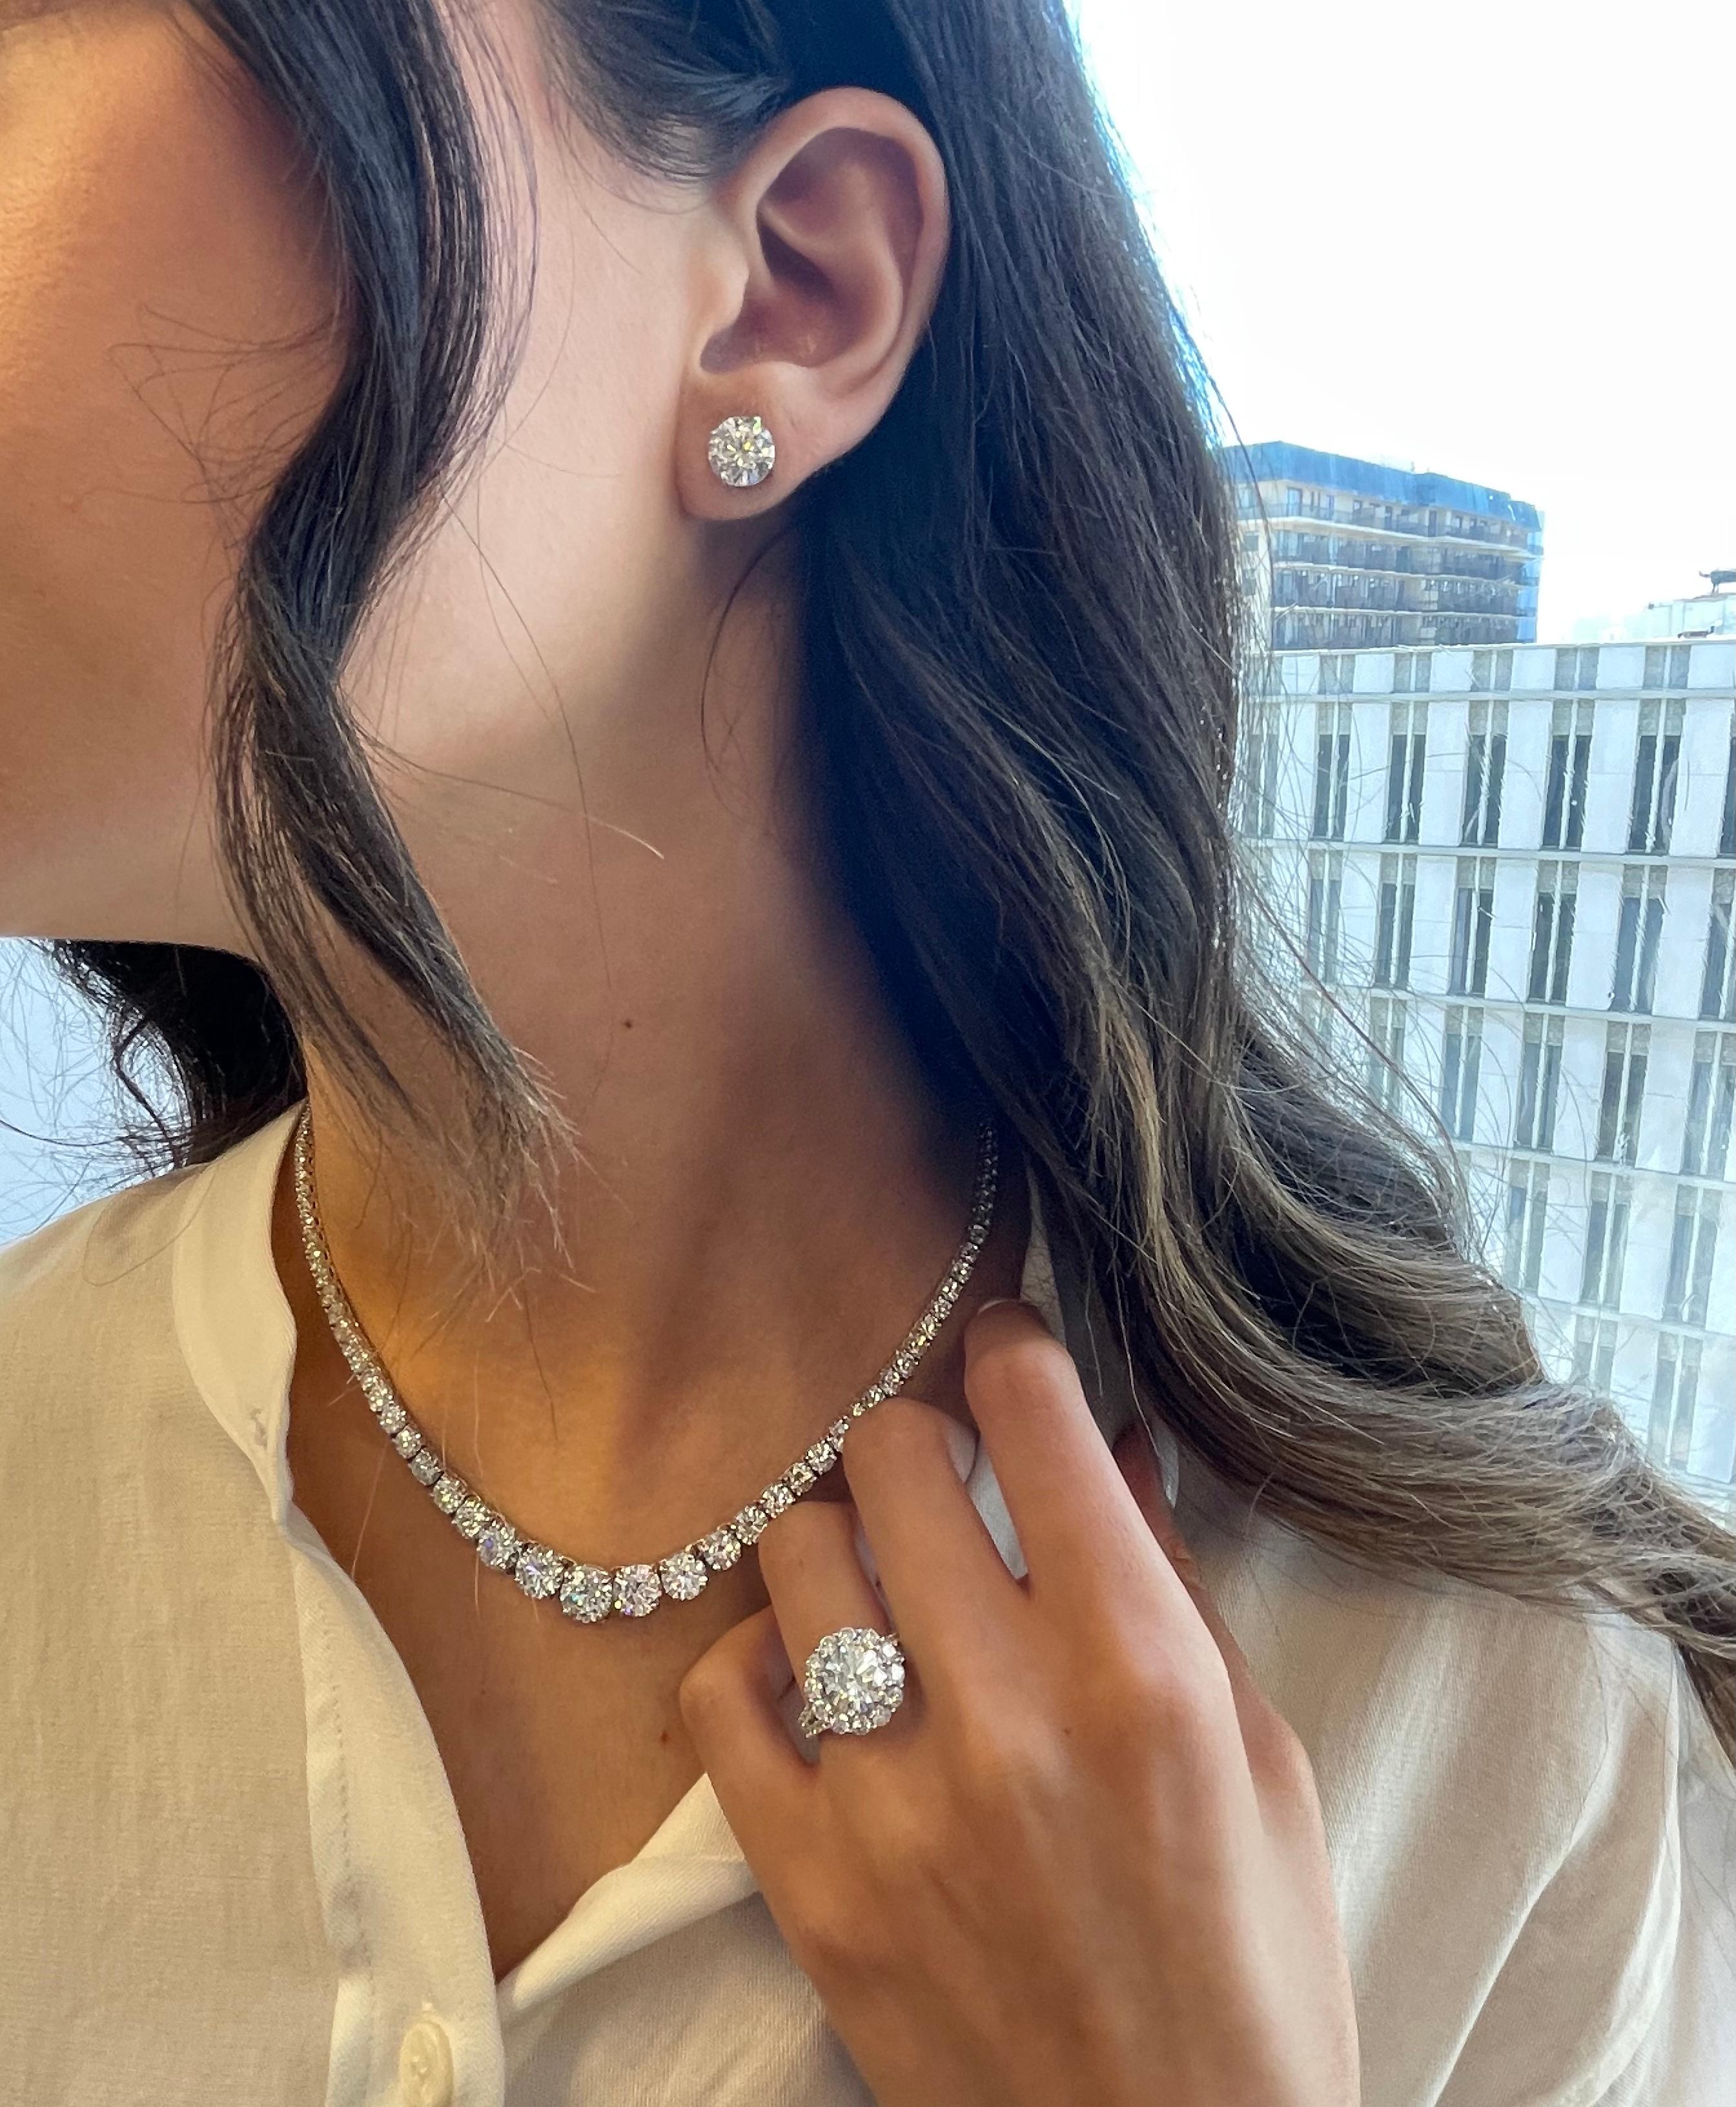 Grand and stunning diamond riviera tennis necklace, with 7 EGL and GIA certificate. Center diamond 2.51ct
High jewelry by Alexander Beverly Hills.
Certified diamonds listed below.
17.84 carats total, 18-karat white gold.
Accommodated with an up to